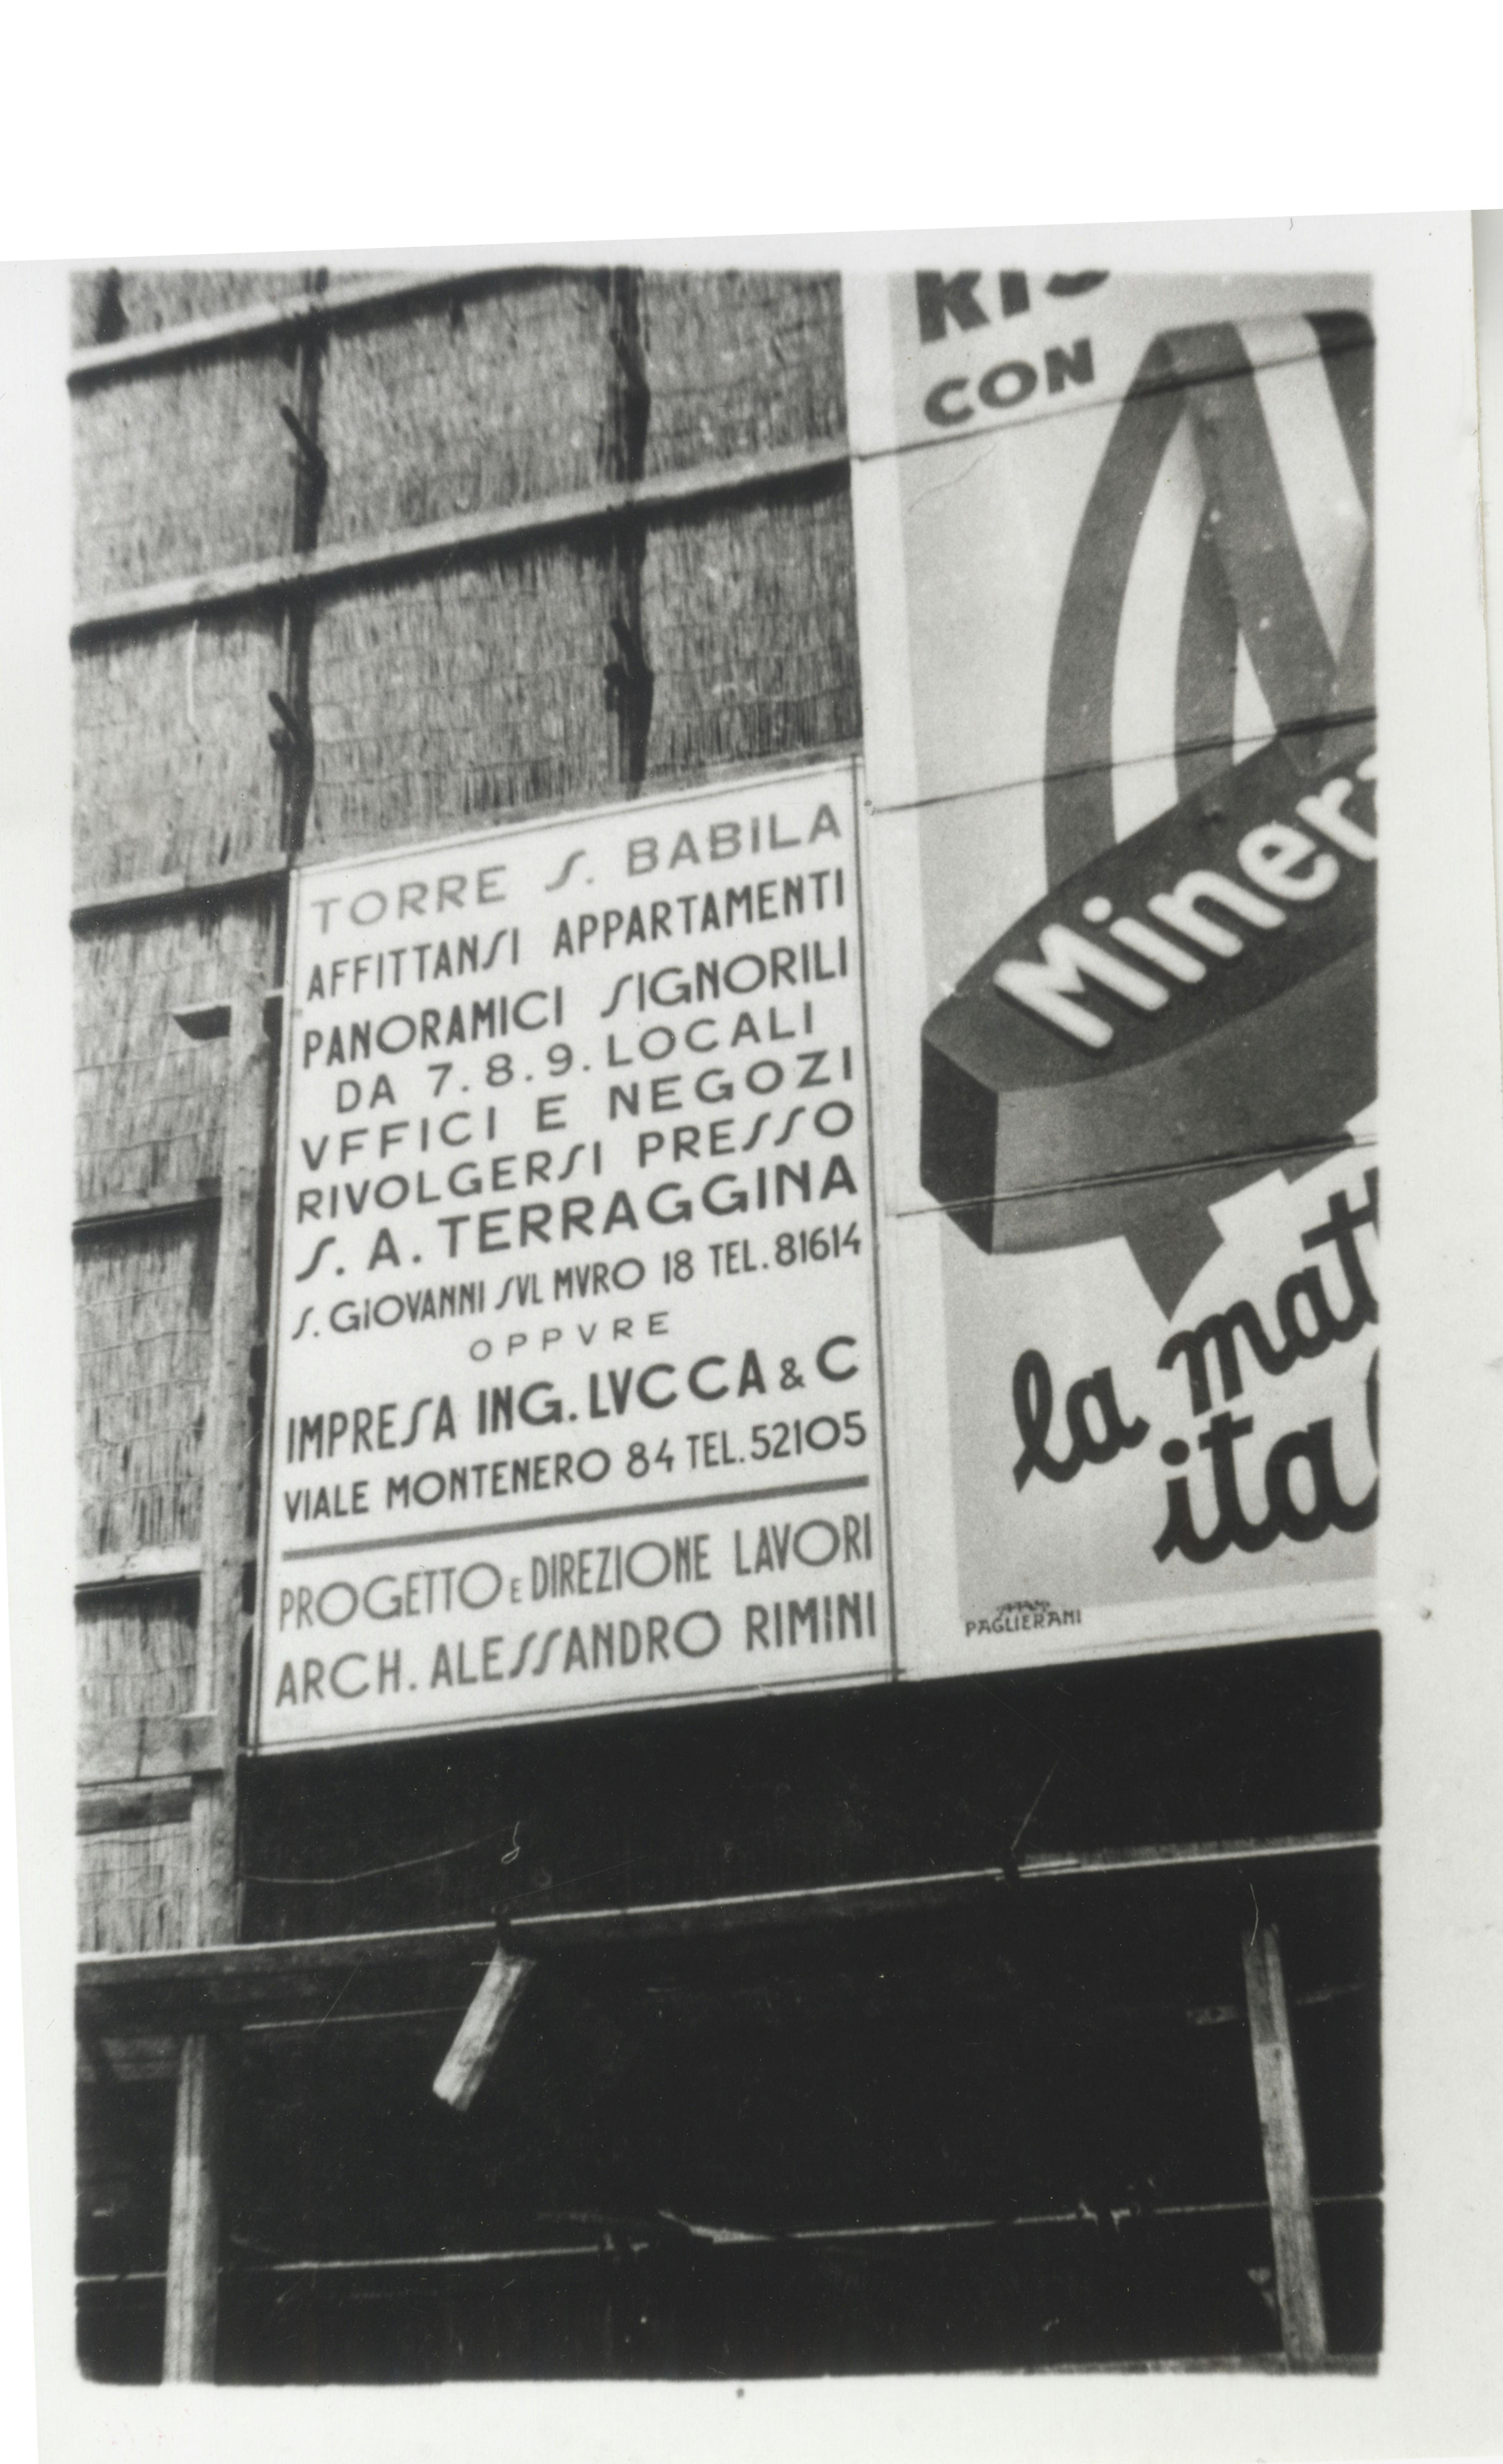 Construction site sign for the Snia Viscosa tower house in Piazza San Babila